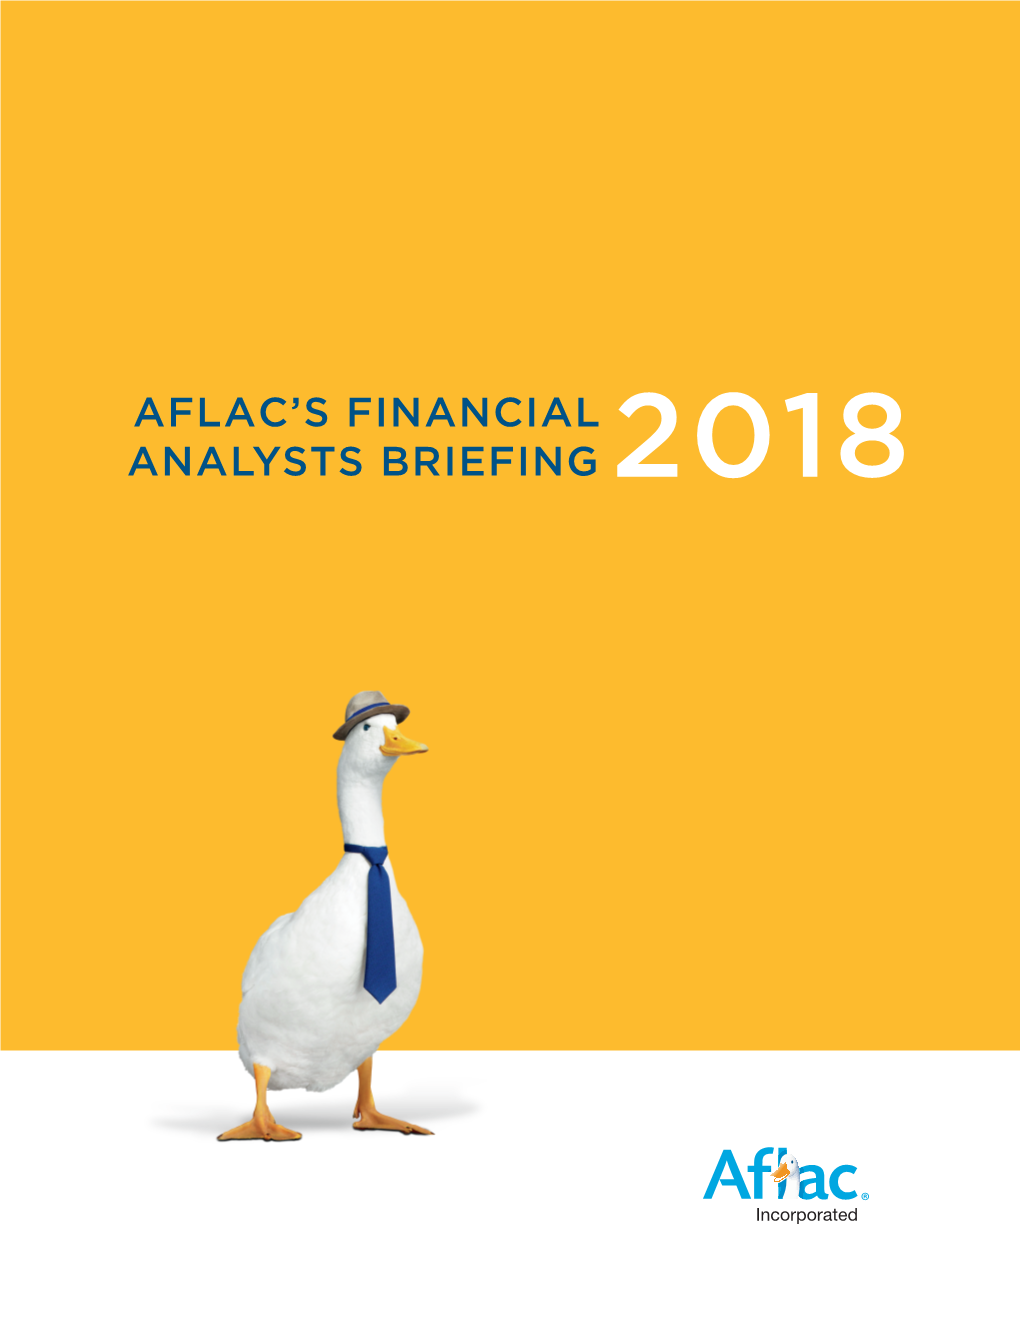 Aflac's Financial Analysts Briefing 2018